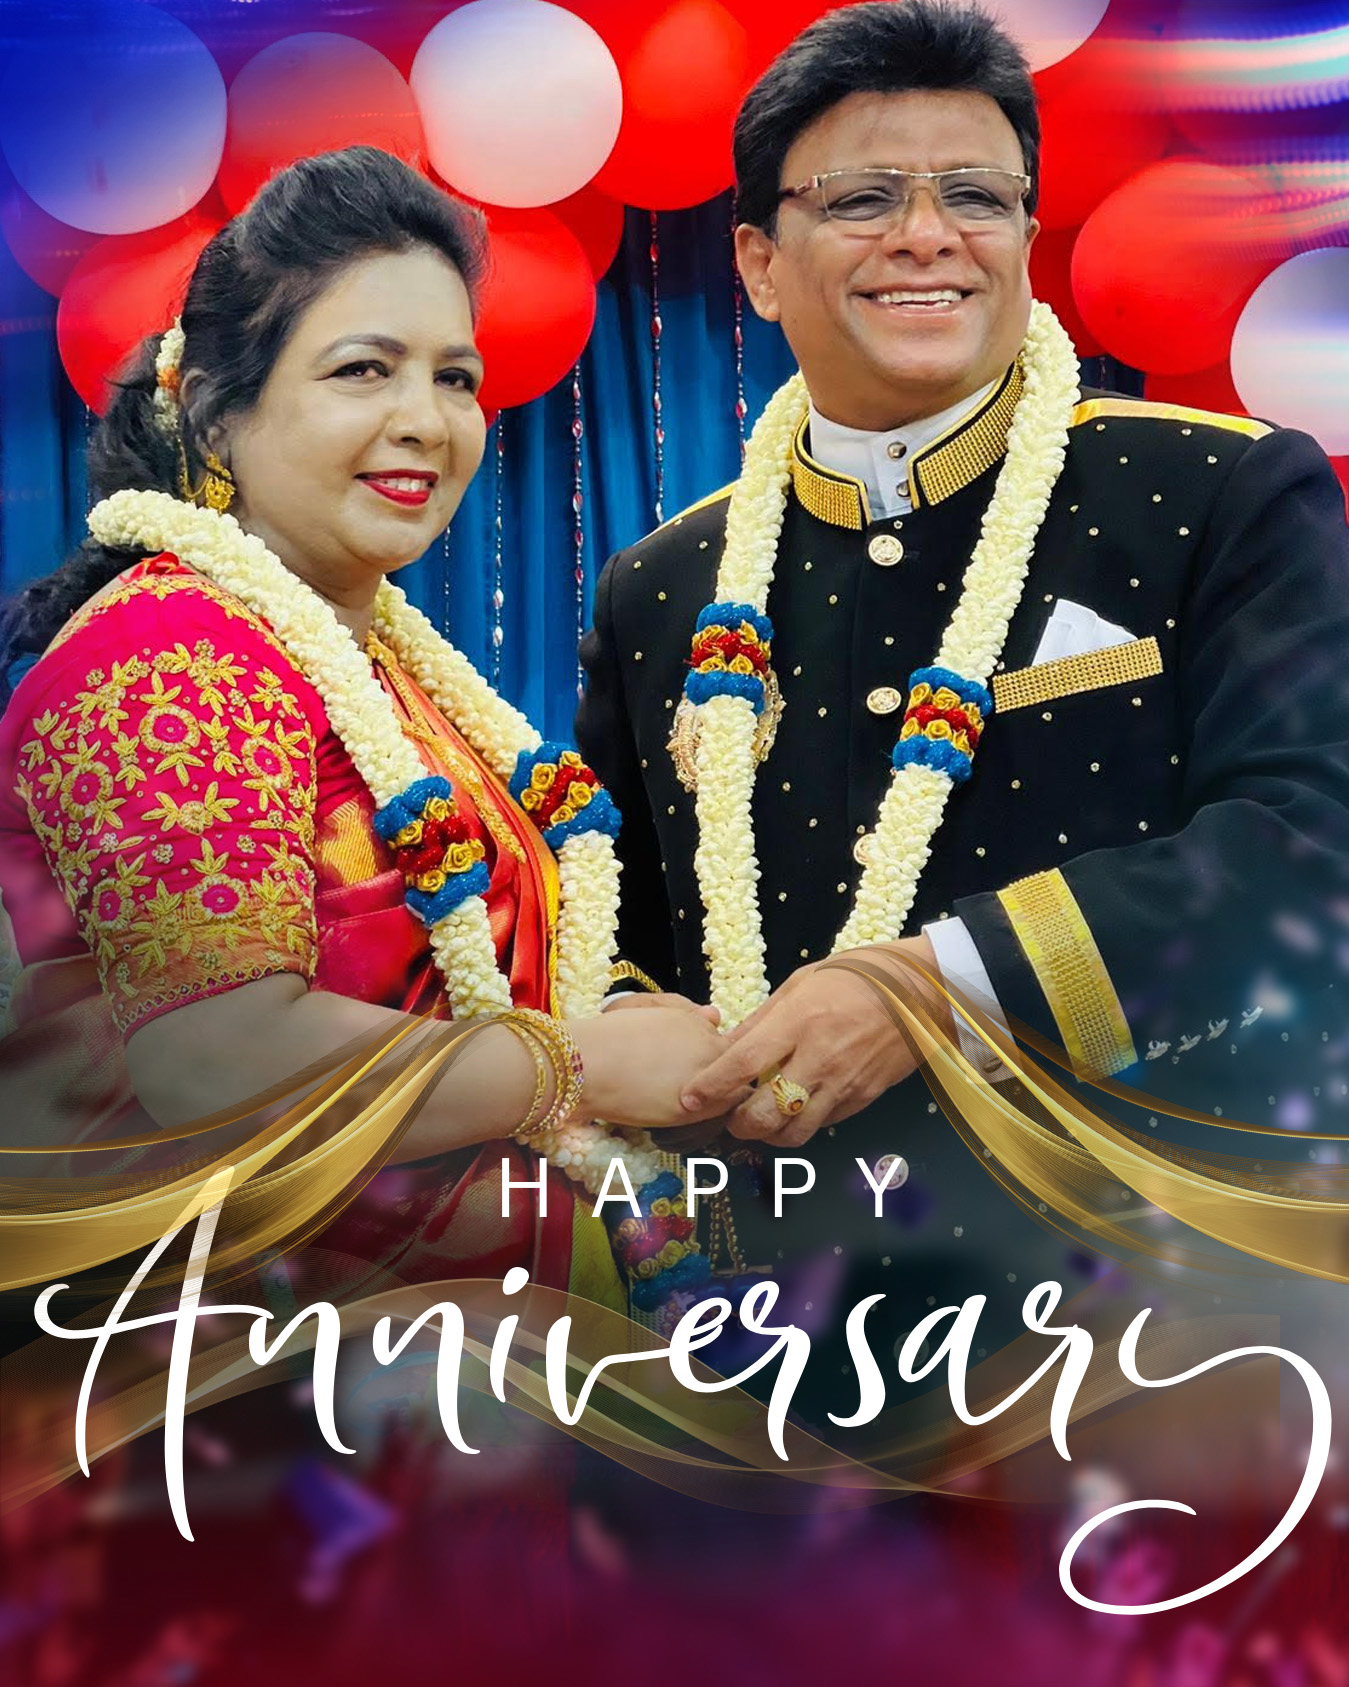 The entire family and members of Grace Ministry wish Bro Andrew Richard and Sis Hanna a Blessed Happy Wedding Anniversary 2024. May your love grow stronger and inspire all, and may life bless you with all the gifts.